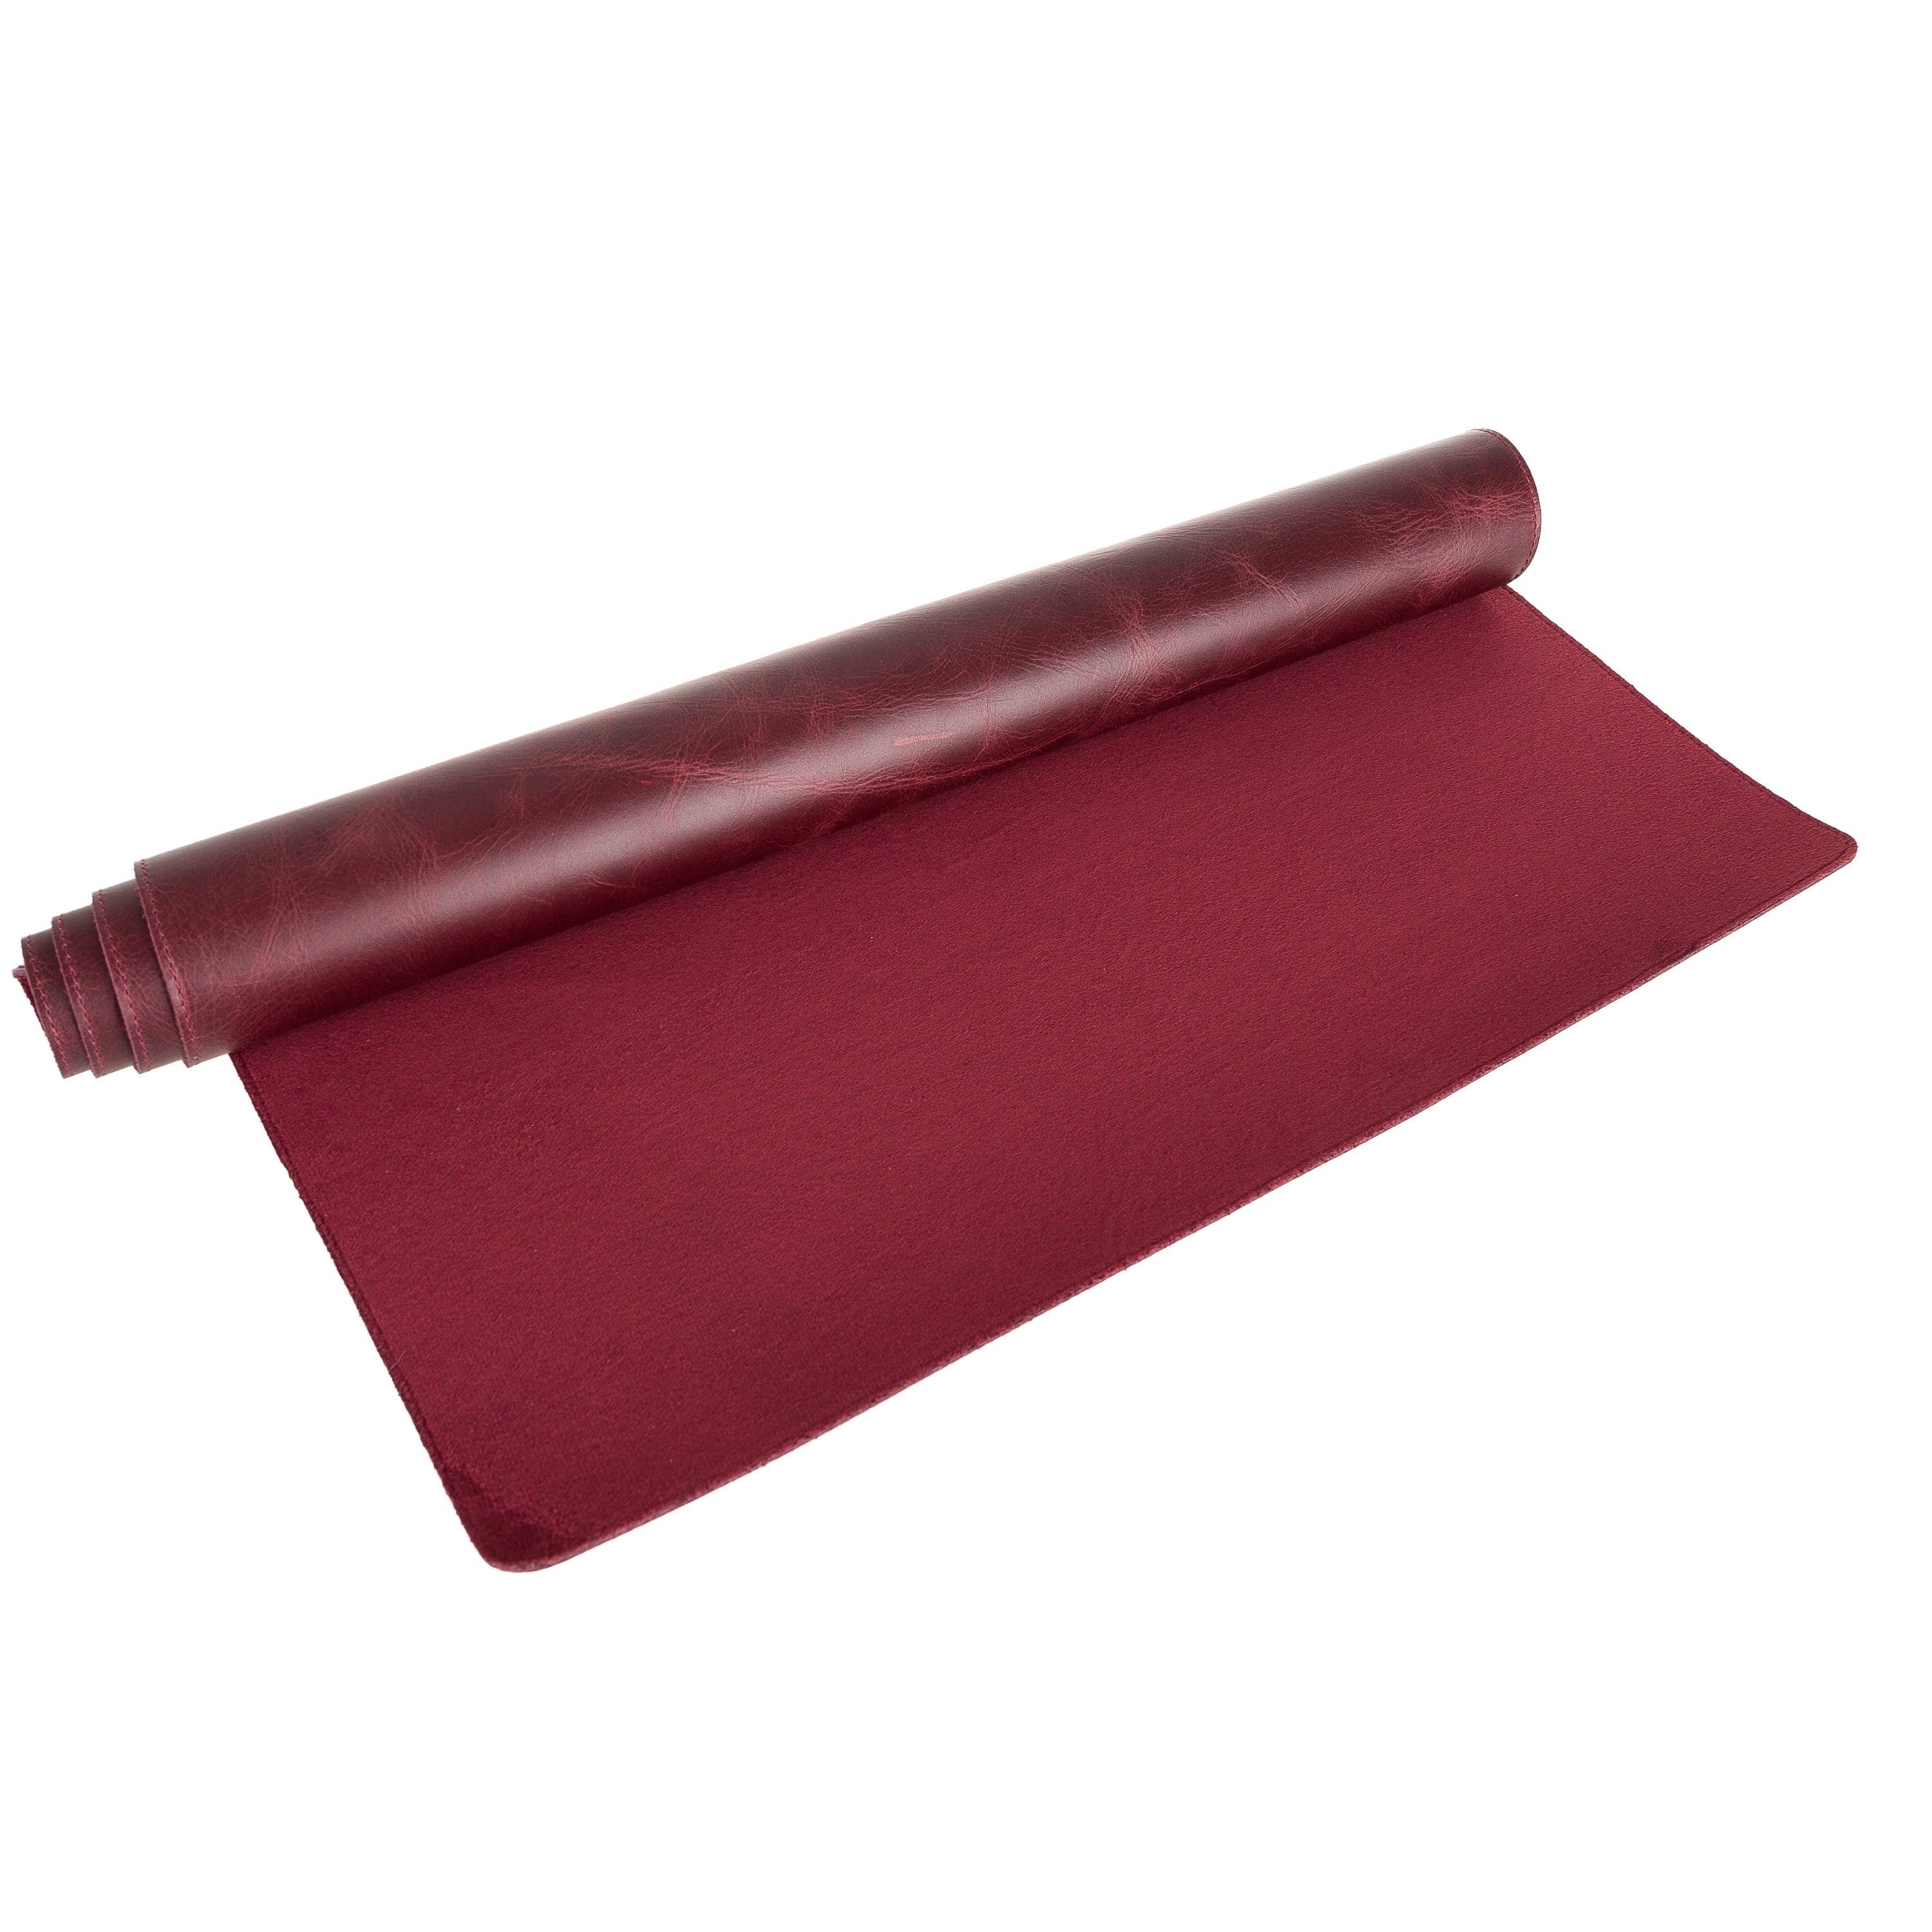 LupinnyLeather Genuine Cherry Leather Deskmat, Computer Pad, Office Desk Pad 8